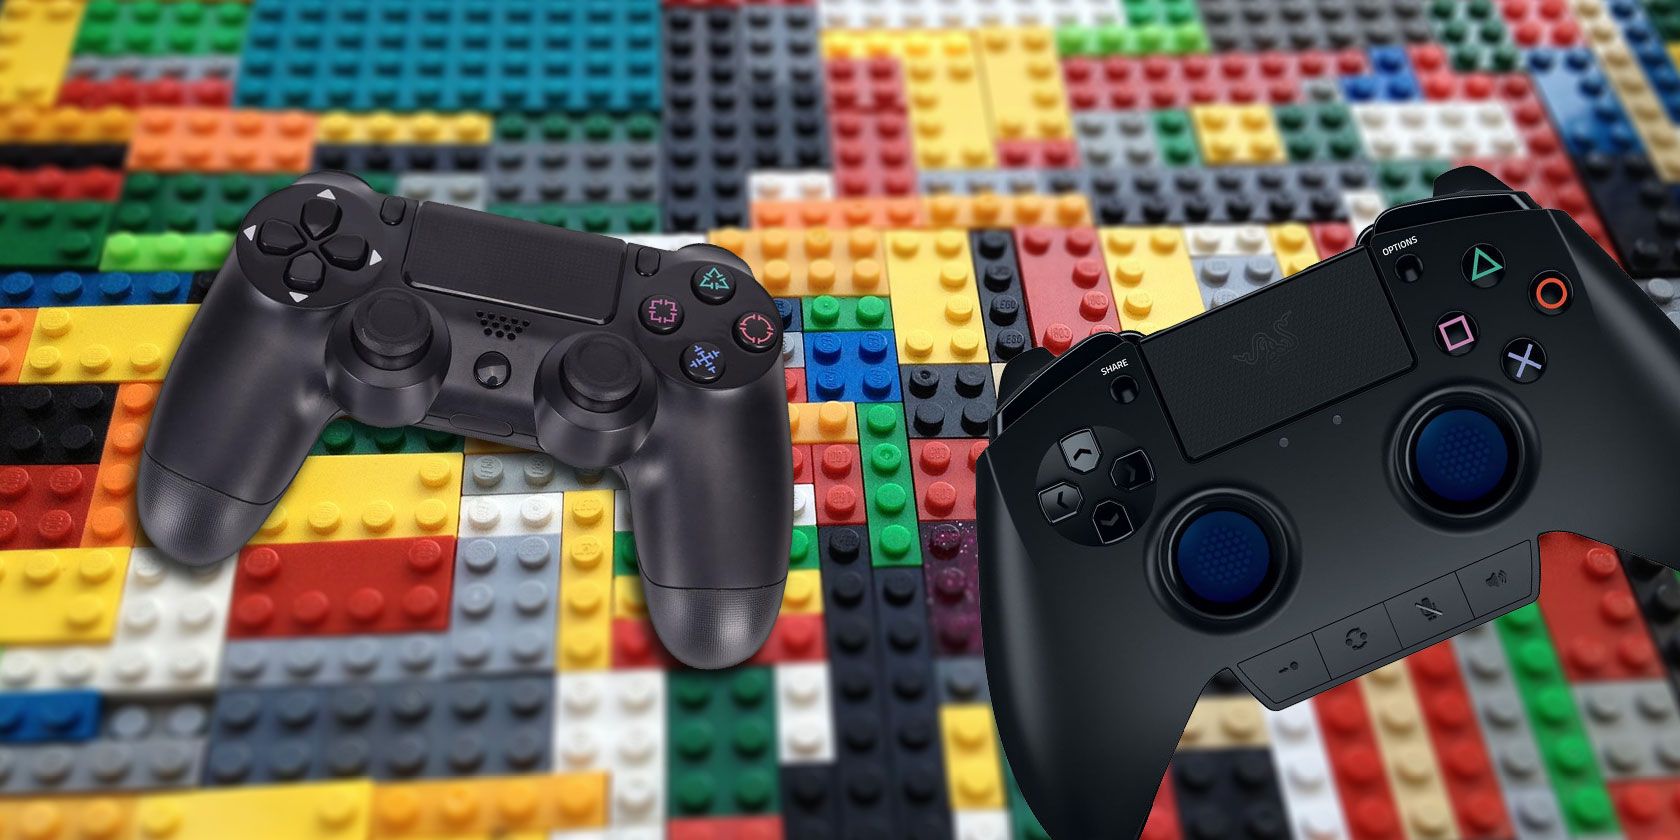 lego jurassic world pc controller issues